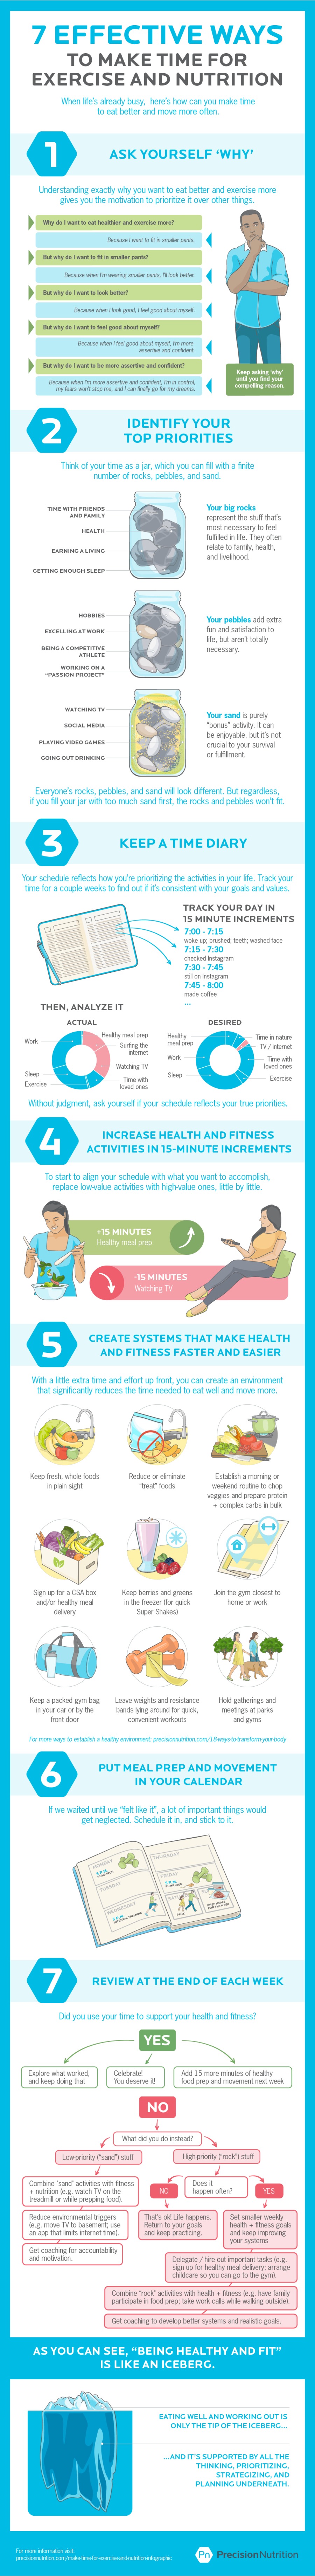 7 EFFECTIVE WAYS

TO MAKE TIME FOR
EXERCISE AND NUTRITION

When life's already busy, here's how can you make time
to eat better and move more often.

ASK YOURSELF ‘WHY’

Understanding exactly why you want to eat better and exercise more
gives you the motivation to prioritize it over other things

) Why do | want to eat healthier and exercise more?

Because | want to fit n smaller pants.

)

But why do | want to fit in

smaller pants?

Because when 'm wearing smaller pants, If look better.

But why do | want to look better?

Because when | look good, | feel good about mysef.

But why do | want to feel good about myself?

Because when | feel good about myself, fm more

assertive and confident.

But why do | want to be more assertive and confident?

Because when Im more assertive and confident, fm m control,

my fears won't stop me, and | can finally go for my dreams,

[Tes
rp oe
rrr ee

{

IDENTIFY YOUR
TOP PRIORITIES

Think of your time as a jar, which you can fill with a finite
number of rocks, pebbles, and sand.

TIME WITH FRIENDS
AND FAMILY

HEALTH

EARNING A LIVING

GETTING ENOUGH SLEEP

HOBBIES

EXCELLING AT WORK

BEING A COMPETITIVE
ATHLETE

WORKING ON A
“PASSION PROJECT”

WATCHING TV

SOCIAL MEDIA

PLAYING VIDEO GAMES

GOING OUT DRINKING

Your big rocks
represent the stuff that's
most necessary to fee!
fulfilled in Ife. They often
relate to family, health,
and kvethood

Your pebbles add extra
fun and satisfaction to
Ife, but aren't totally
necessary.

Your sand is purely
“bonus” activity. It can
be enjoyable, but it’s not
crucial to your survival
or fulfillment

Everyone's rocks, pebbles, and sand will look different. But regardless,
if you fill your jar with too much sand first, the rocks and pebbles won't fit.

KEEP A TIME DIARY

Your schedule reflects how you're prioritizing the activities in your life. Track your
time for a couple weeks to find out if it's consistent with your goals and values.

\

THEN, ANALYZE
ACTUAL

! Healthy meal prep
Surfing the

Sleep

Exercise

TRACK YOUR DAY IN
15 MINUTE INCREMENTS

oa

7:00-7:15
woke up; brushed; teeth; washed face

7:15-7:30
checked Instagram
7:30 - 7:45
stil on Instagram
7:45 - 8:00
made coffee

IT

Heathy
meal prep
internet
Work
Watching TV
Time with Seep
loved ones

DESIRED
Time in nature
TV / internet

Time with
loved ones

Exercise

Without judgment, ask yourself if your schedule reflects your true priorities

INCREASE HEALTH AND FITNESS
ACTIVITIES IN15-MINUTE INCREMENTS

To start to align your schedule with what you want to accomplish,
replace low-value activities with high-value ones, little by little.

-15 MINUTES
Watching TV

CREATE SYSTEMS THAT MAKE HEALTH
AND FITNESS FASTER AND EASIER

With a little extra time and effort up front, you can create an environment
that significantly reduces the time needed to eat well and move more.

Keep fresh, whole foods
in plain sight

Sign up for a CSA box
and/or healthy meal

Keep a packed gym bag
In your car or by the
front door

For more ways to

A

»

MN
g

Reduce or eliminate
“treat” foods

Keep bernes and greens
in the freezer (for quick
Super Shakes)

Leave weights and resistance
bands ing around for quick,
convenient workouts

a heatthy emvronment: prectsionnurRion. com

Establish a morning or
weekend routine to chop
veggies and prepare protein
+ complex carbs in bulk

Vas
a

Join the gym closest to
home or work

Hold gatherings and
meetings at parks
and gyms

18 ways to transform your body
18ways to transformyour body

PUT MEAL PREP AND MOVEMENT
IN YOUR CALENDAR

If we waited until we “felt like it", a lot of important things would
get neglected. Schedule it in, and stick to it.

REVIEW AT THE END OF EACH WEEK

Did you use your time to support your health and fitness?

=

 

Explore what worked,
and keep doing that

Celebrate!
You deserve it!

Add 15 more minutes of healthy
food prep and movement next week

[)
y Commer)

 

Low-priority (“sand”) stuff

/

Combine ‘sand’ activites with fitness

Highprionty (‘rock’) stuff

+ nutrition (e.g. watch TV on the
treadmill or while prepping food)

Reduce environmental tnggers
(e.g. move TV to basement; use
an app that mits interns ne).

Get coaching for accountability
and motivation

Combine “rock” activities with health + fitness (e.g. have family
participate in food prep; take work calls while waking outside).

Set smaller weekly
health + fitness goals
and keep improving
your systems

Delegate / hire out important tasks (e.g.
sign up for healthy meal delivery; arrange
childcare so you can go to the gym).

Get coaching to develop better systems and realistic goals.

AS YOU CAN SEE, “BEING HEALTHY AND FIT”
IS LIKE AN ICEBERG.

A

EATING WELL AND WORKING OUT IS
ONLY THE TIP OF THE ICEBERG...

...AND IT'S SUPPORTED BY ALL THE
THINKING, PRIORITIZING,
STRATEGIZING, AND

PLANNING UNDERNEATH.